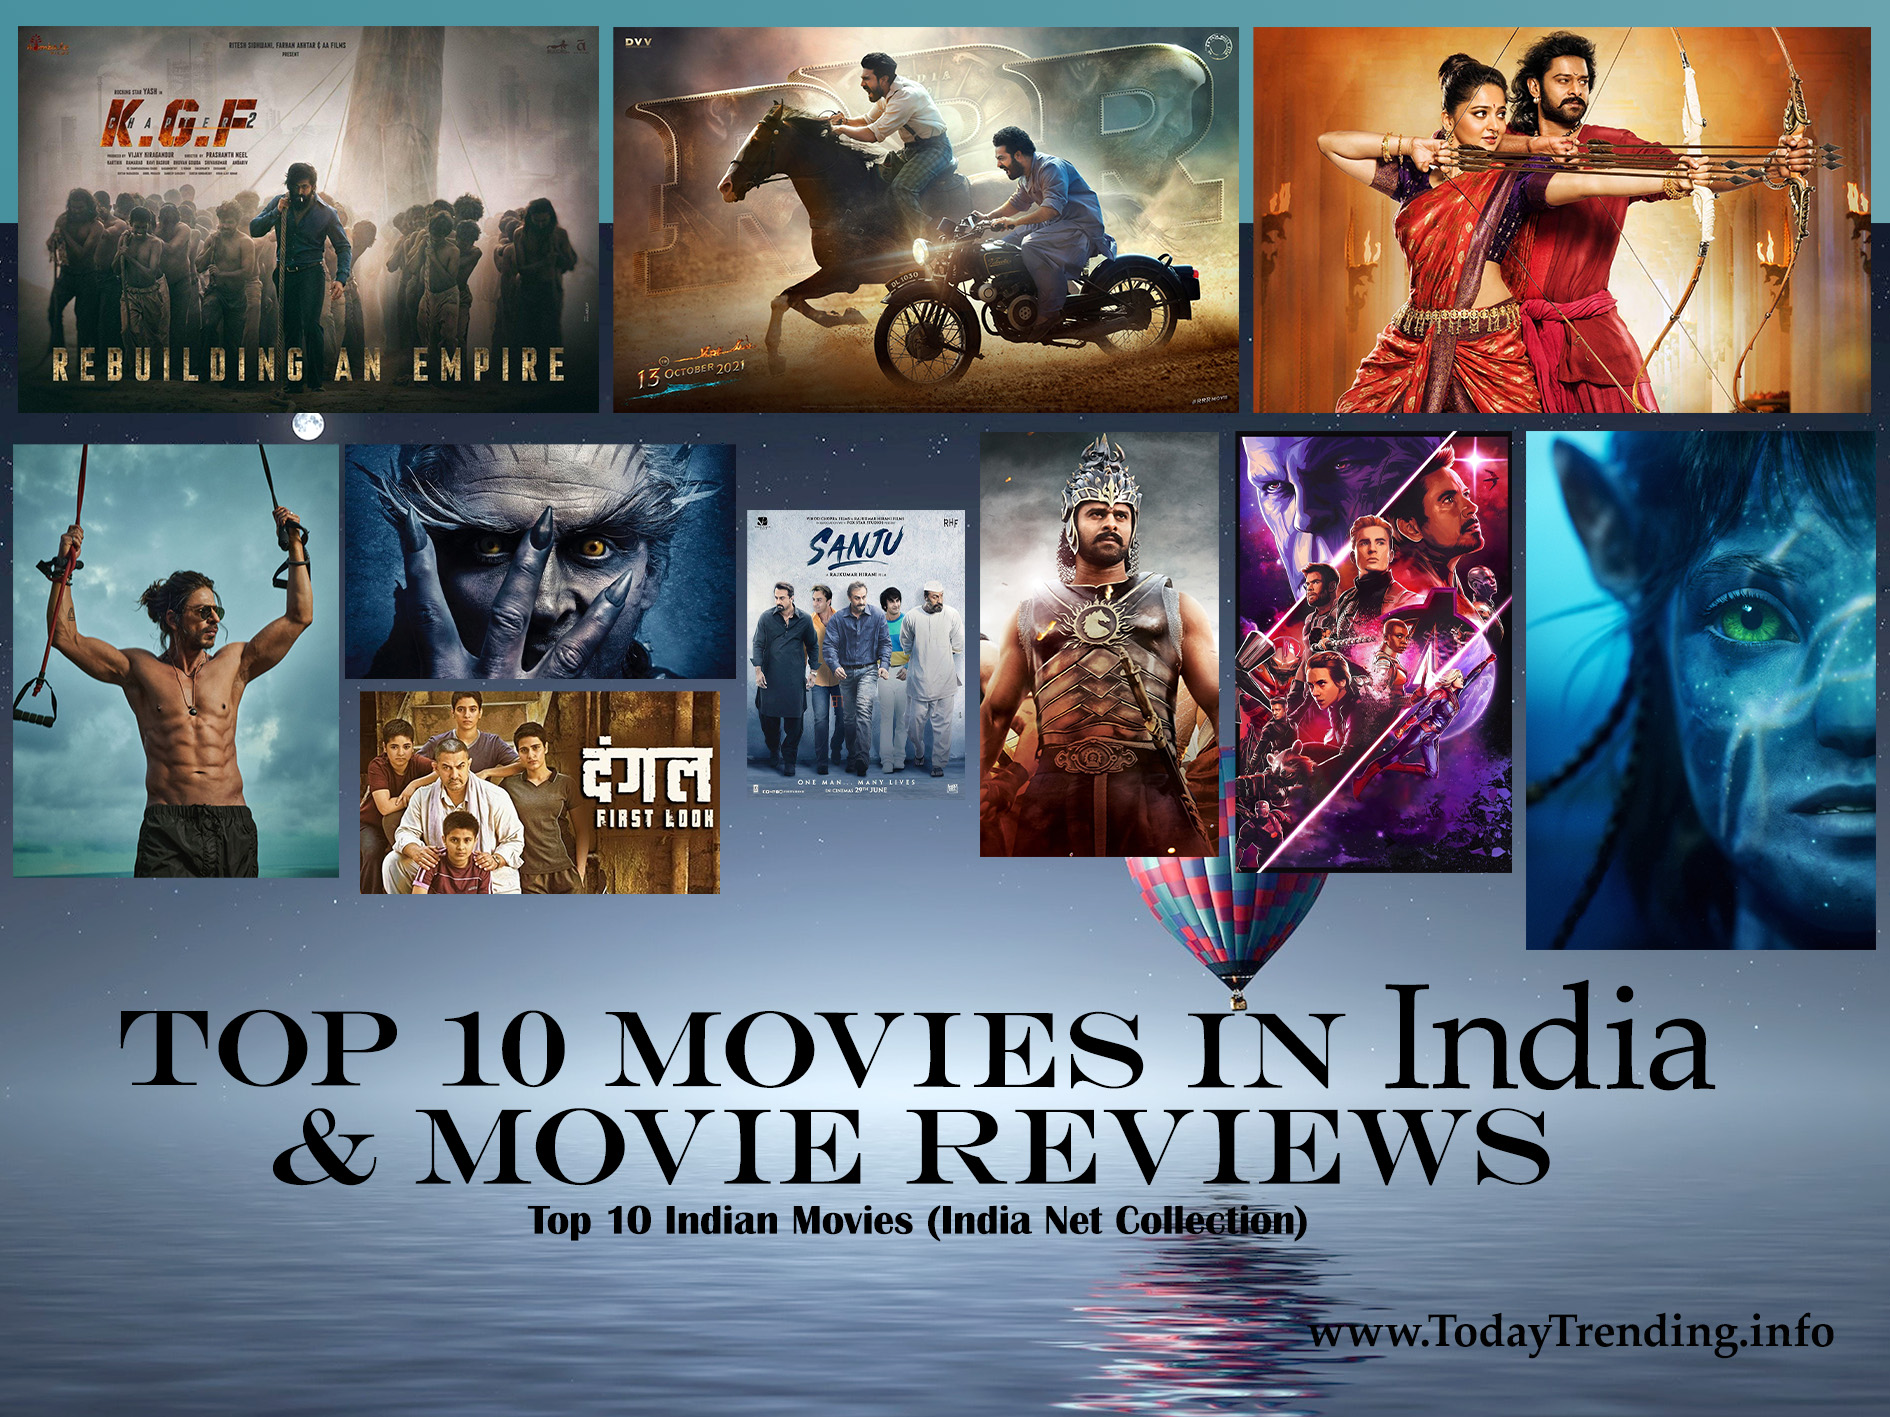 Top 10 Movies In India & Movies